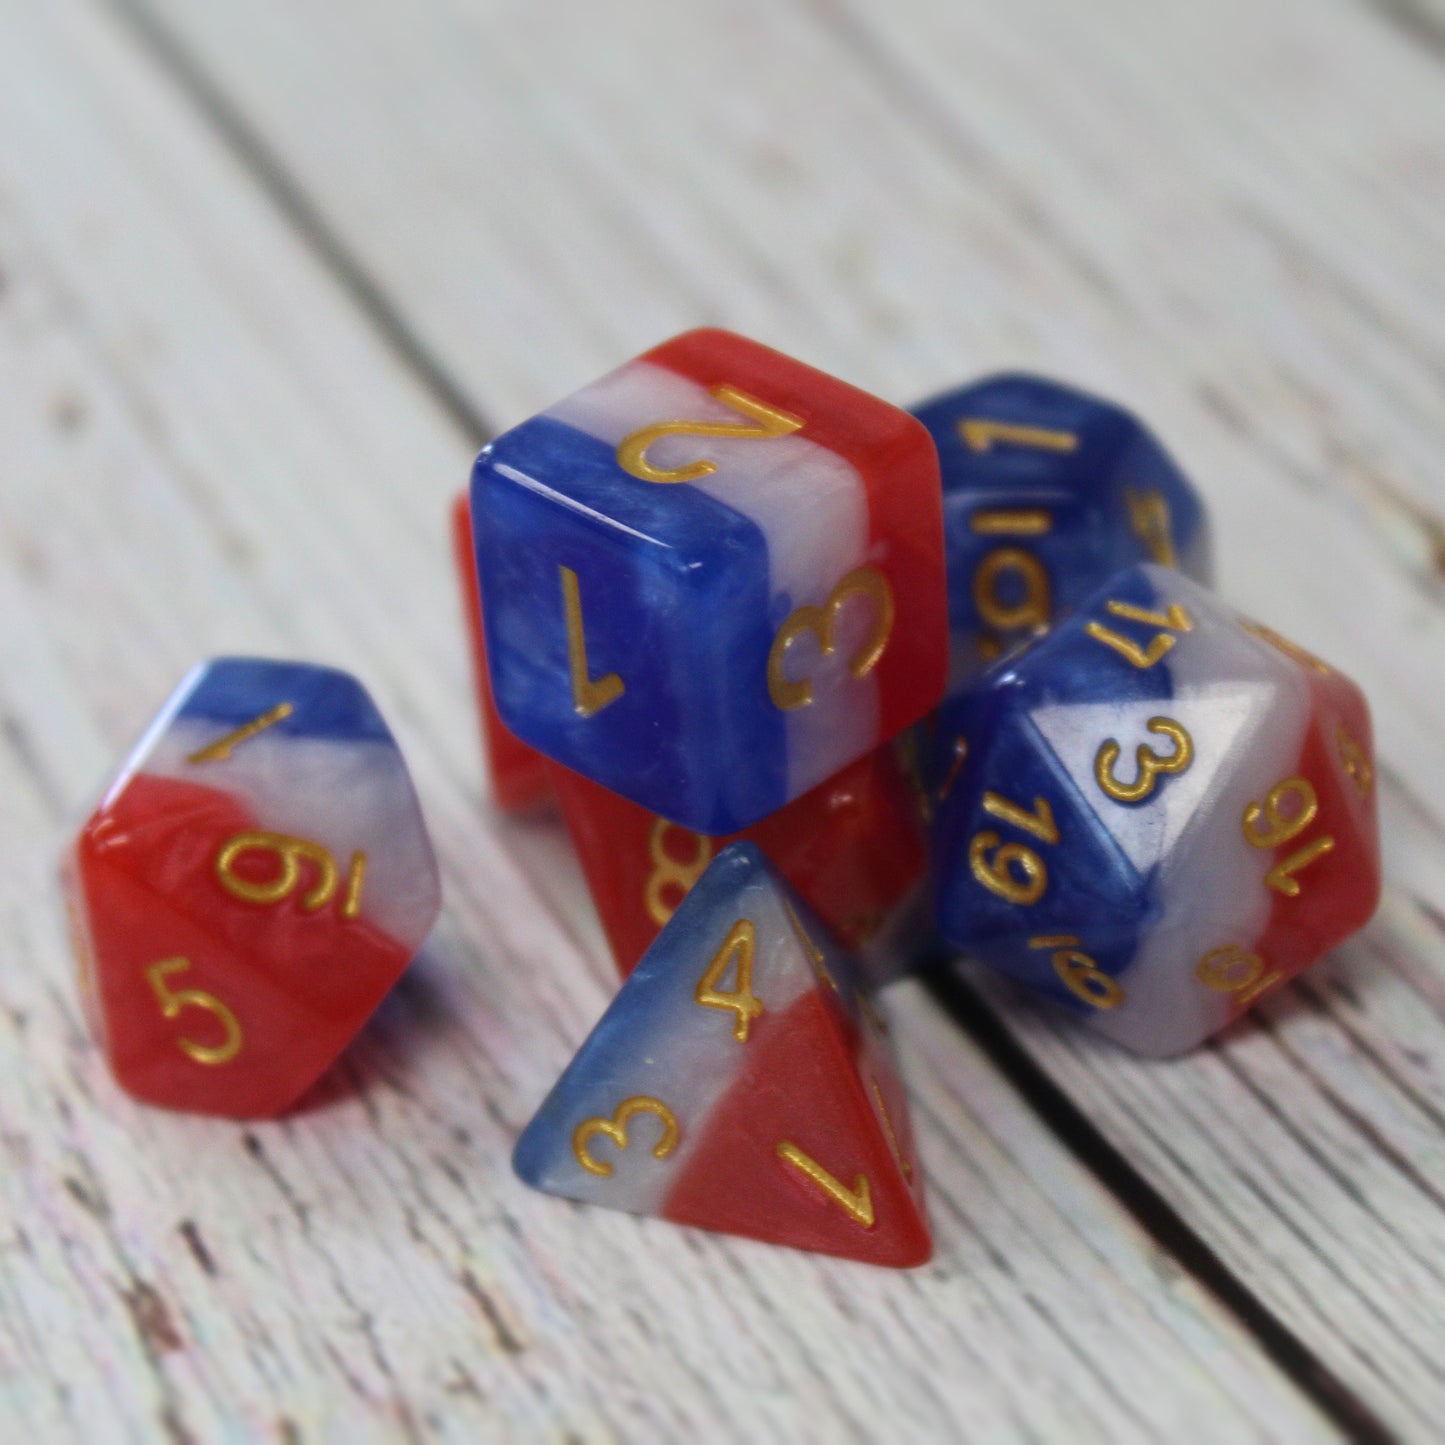 layered dice made of red, white, and blue plastic 